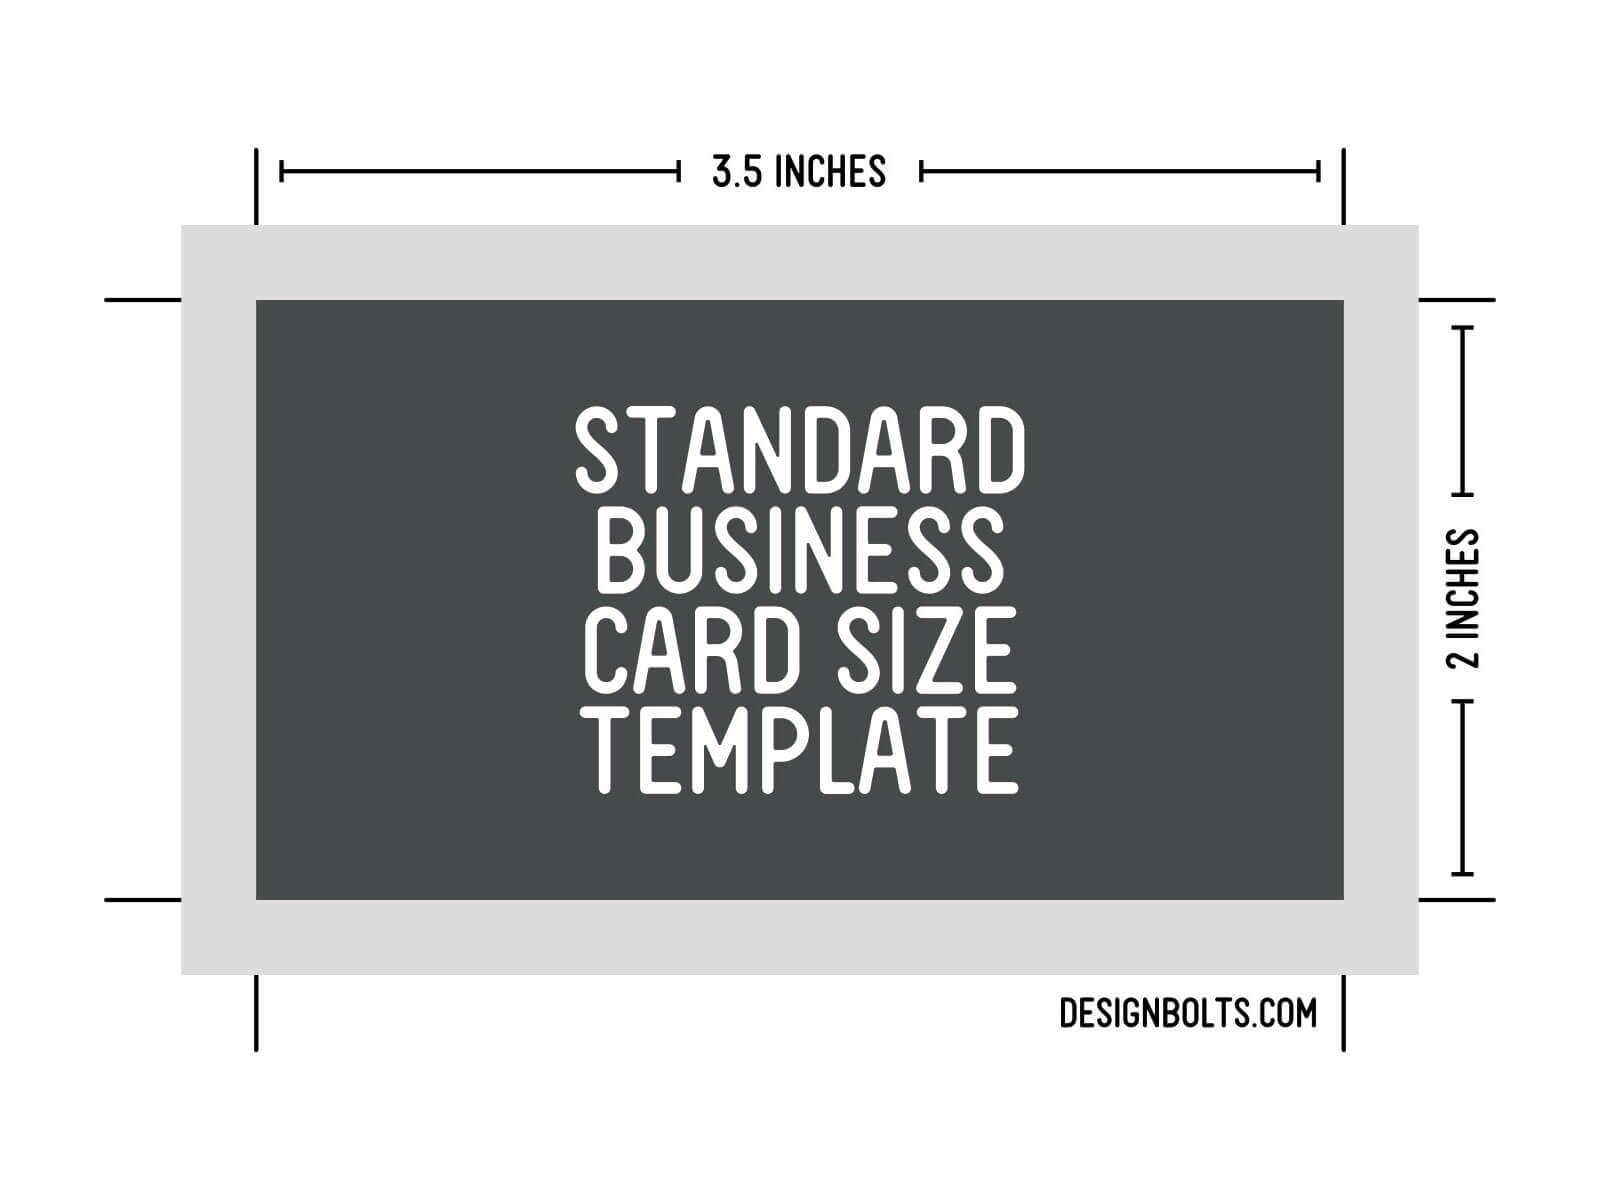 15 Psd Business Card Template Size Images – Standard Inside Business Card Size Template Psd